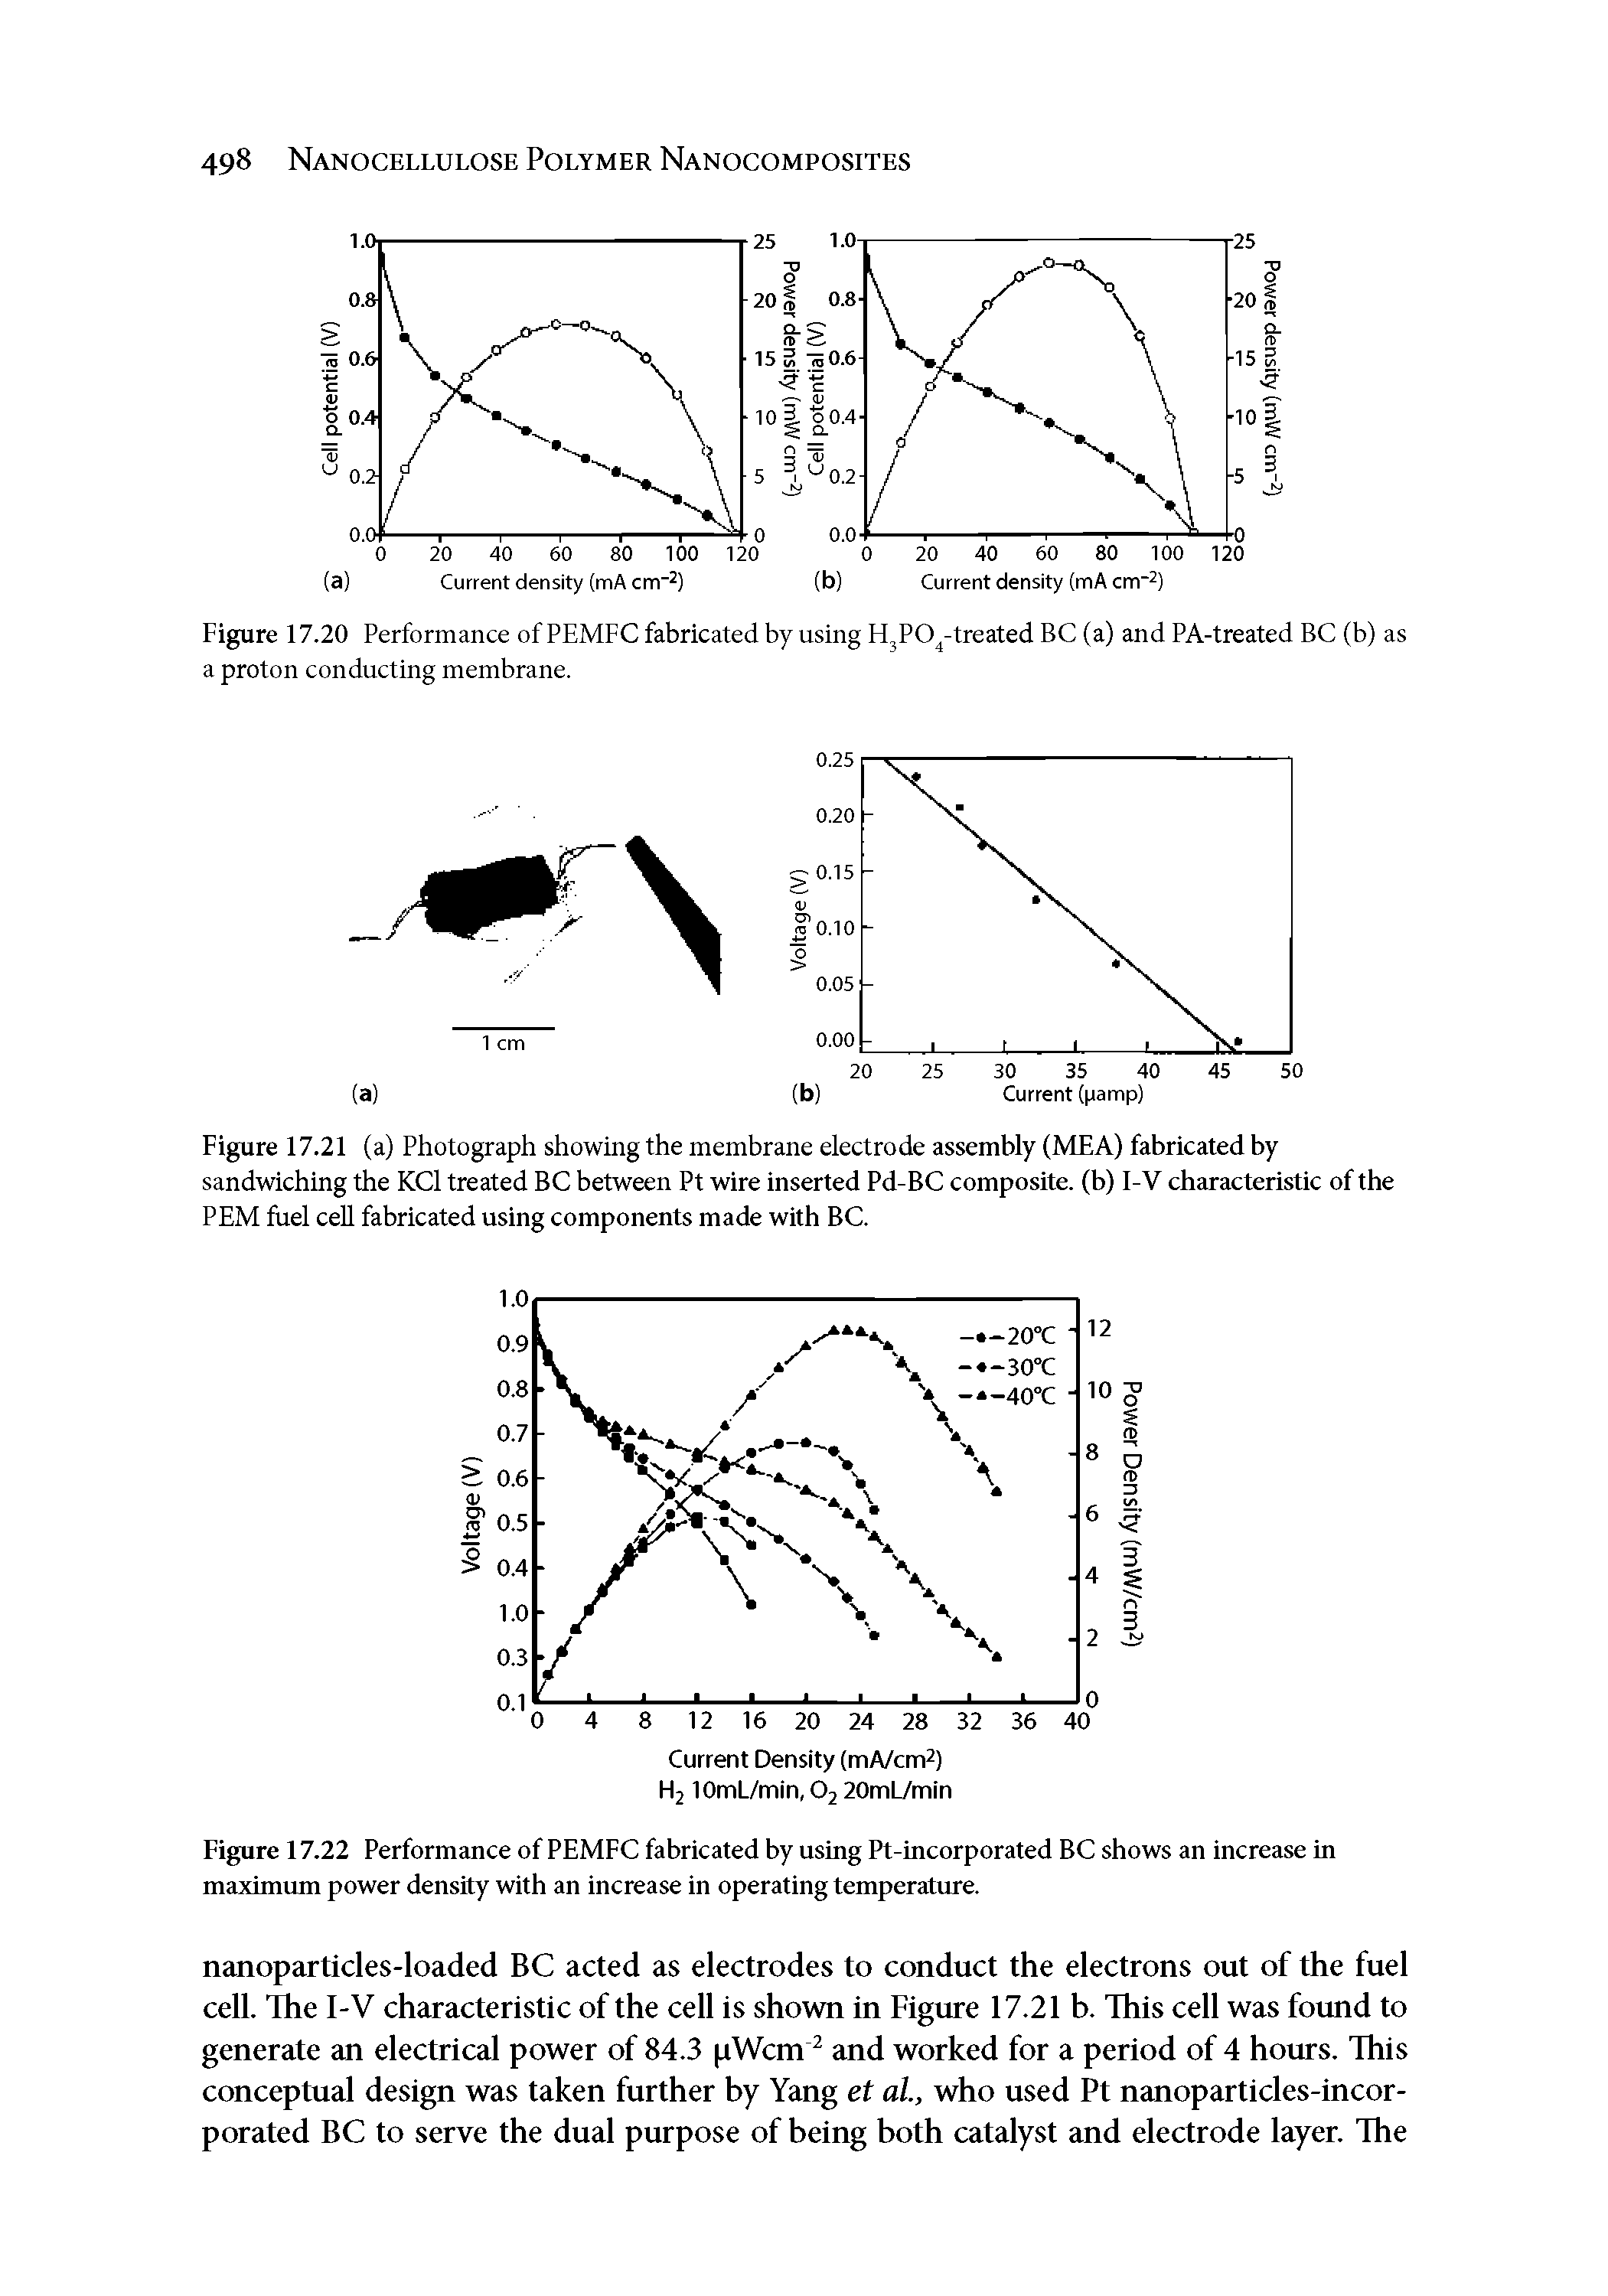 Figure 17.22 Performance of PEMFC fabricated by using Pt-incorporated BC shows an increase in maximum power density with an increase in operating temperature.